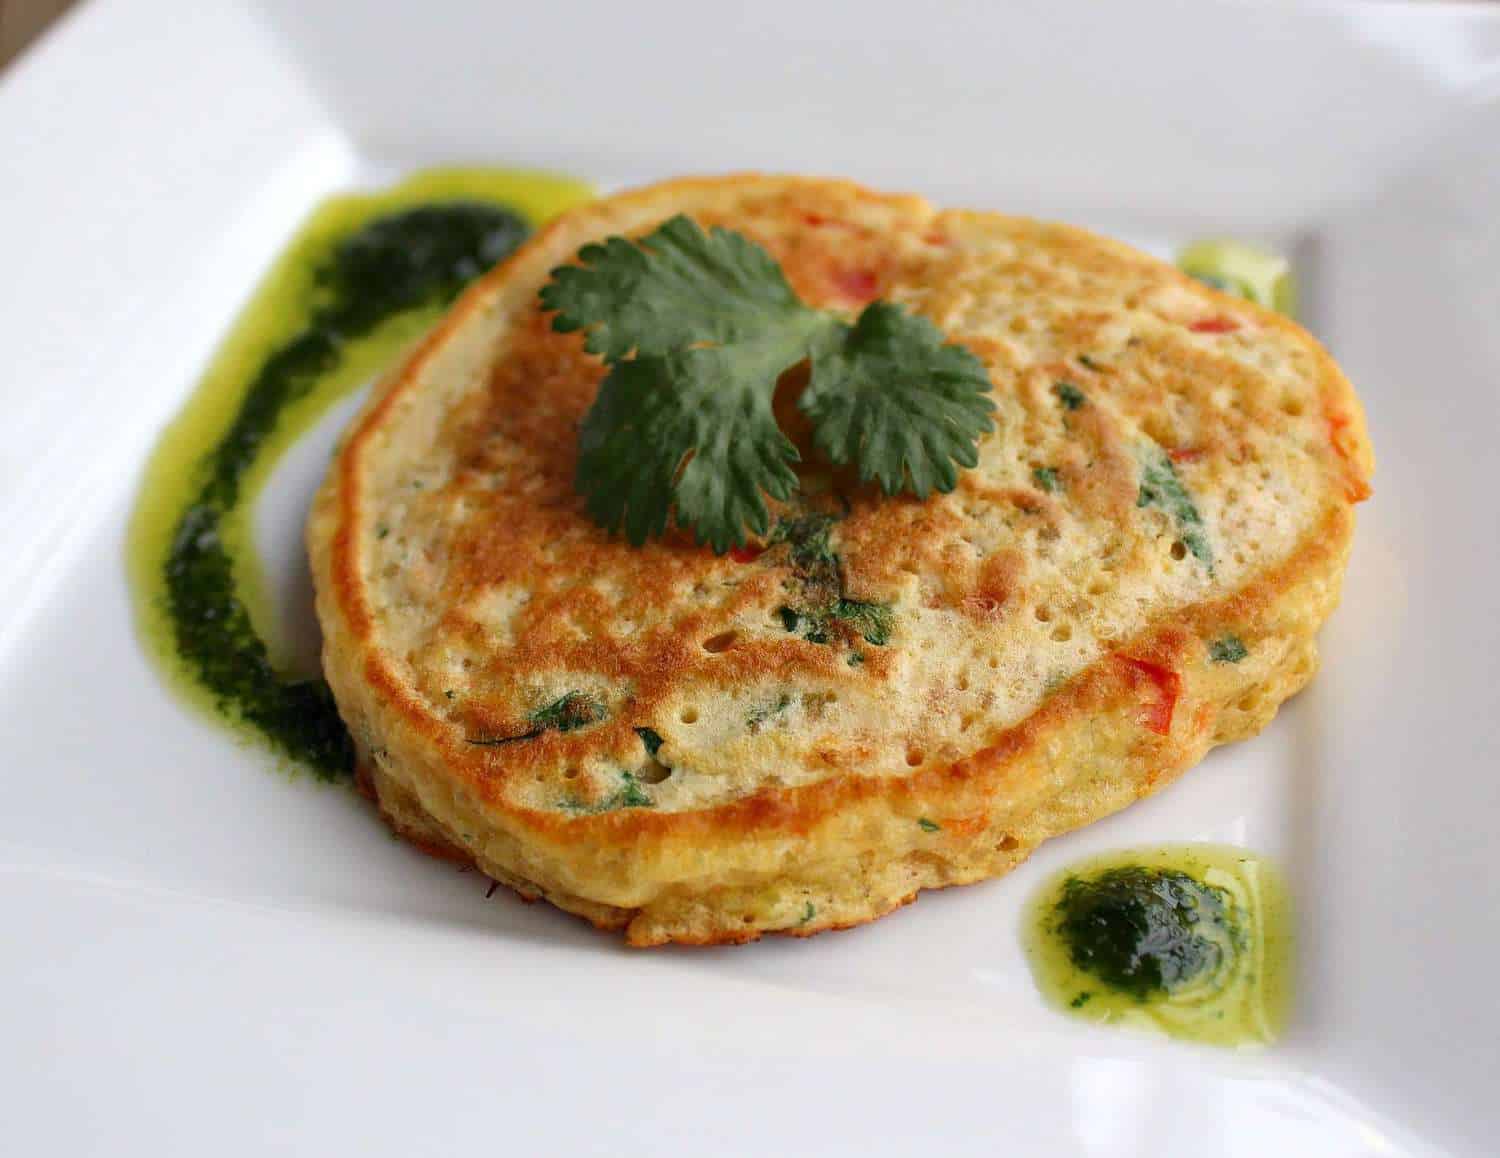 A single pancake on square white plate with vinaigrette, garnished with sprig of parsley.